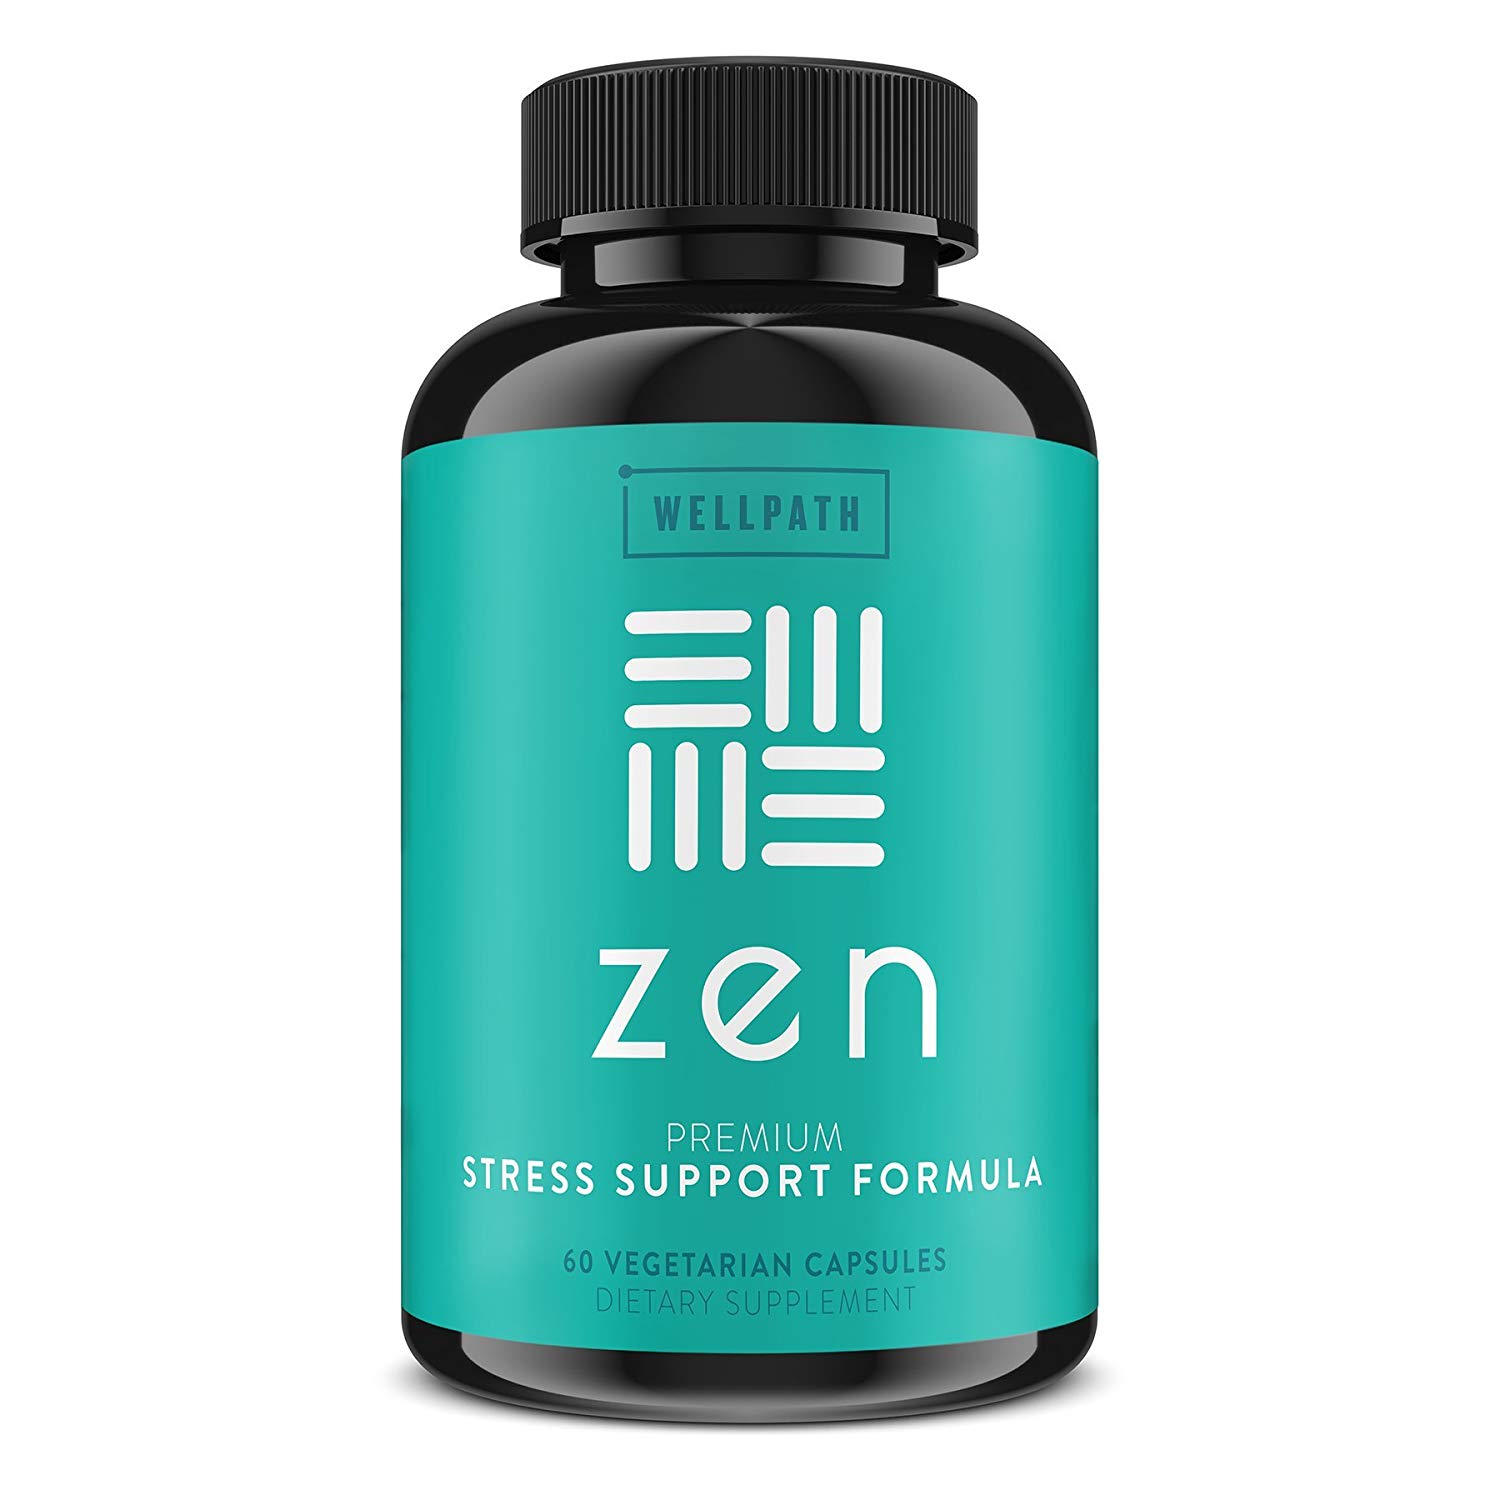 Zen Premium Anxiety and Stress Relief Supplement - Natural Herbal Formula Developed to Promote Calm, Positive Mood - with Ashwagandha, L-Theanine, Rhodiola Rosea, Hawthorne - 60 Veg. Capsules